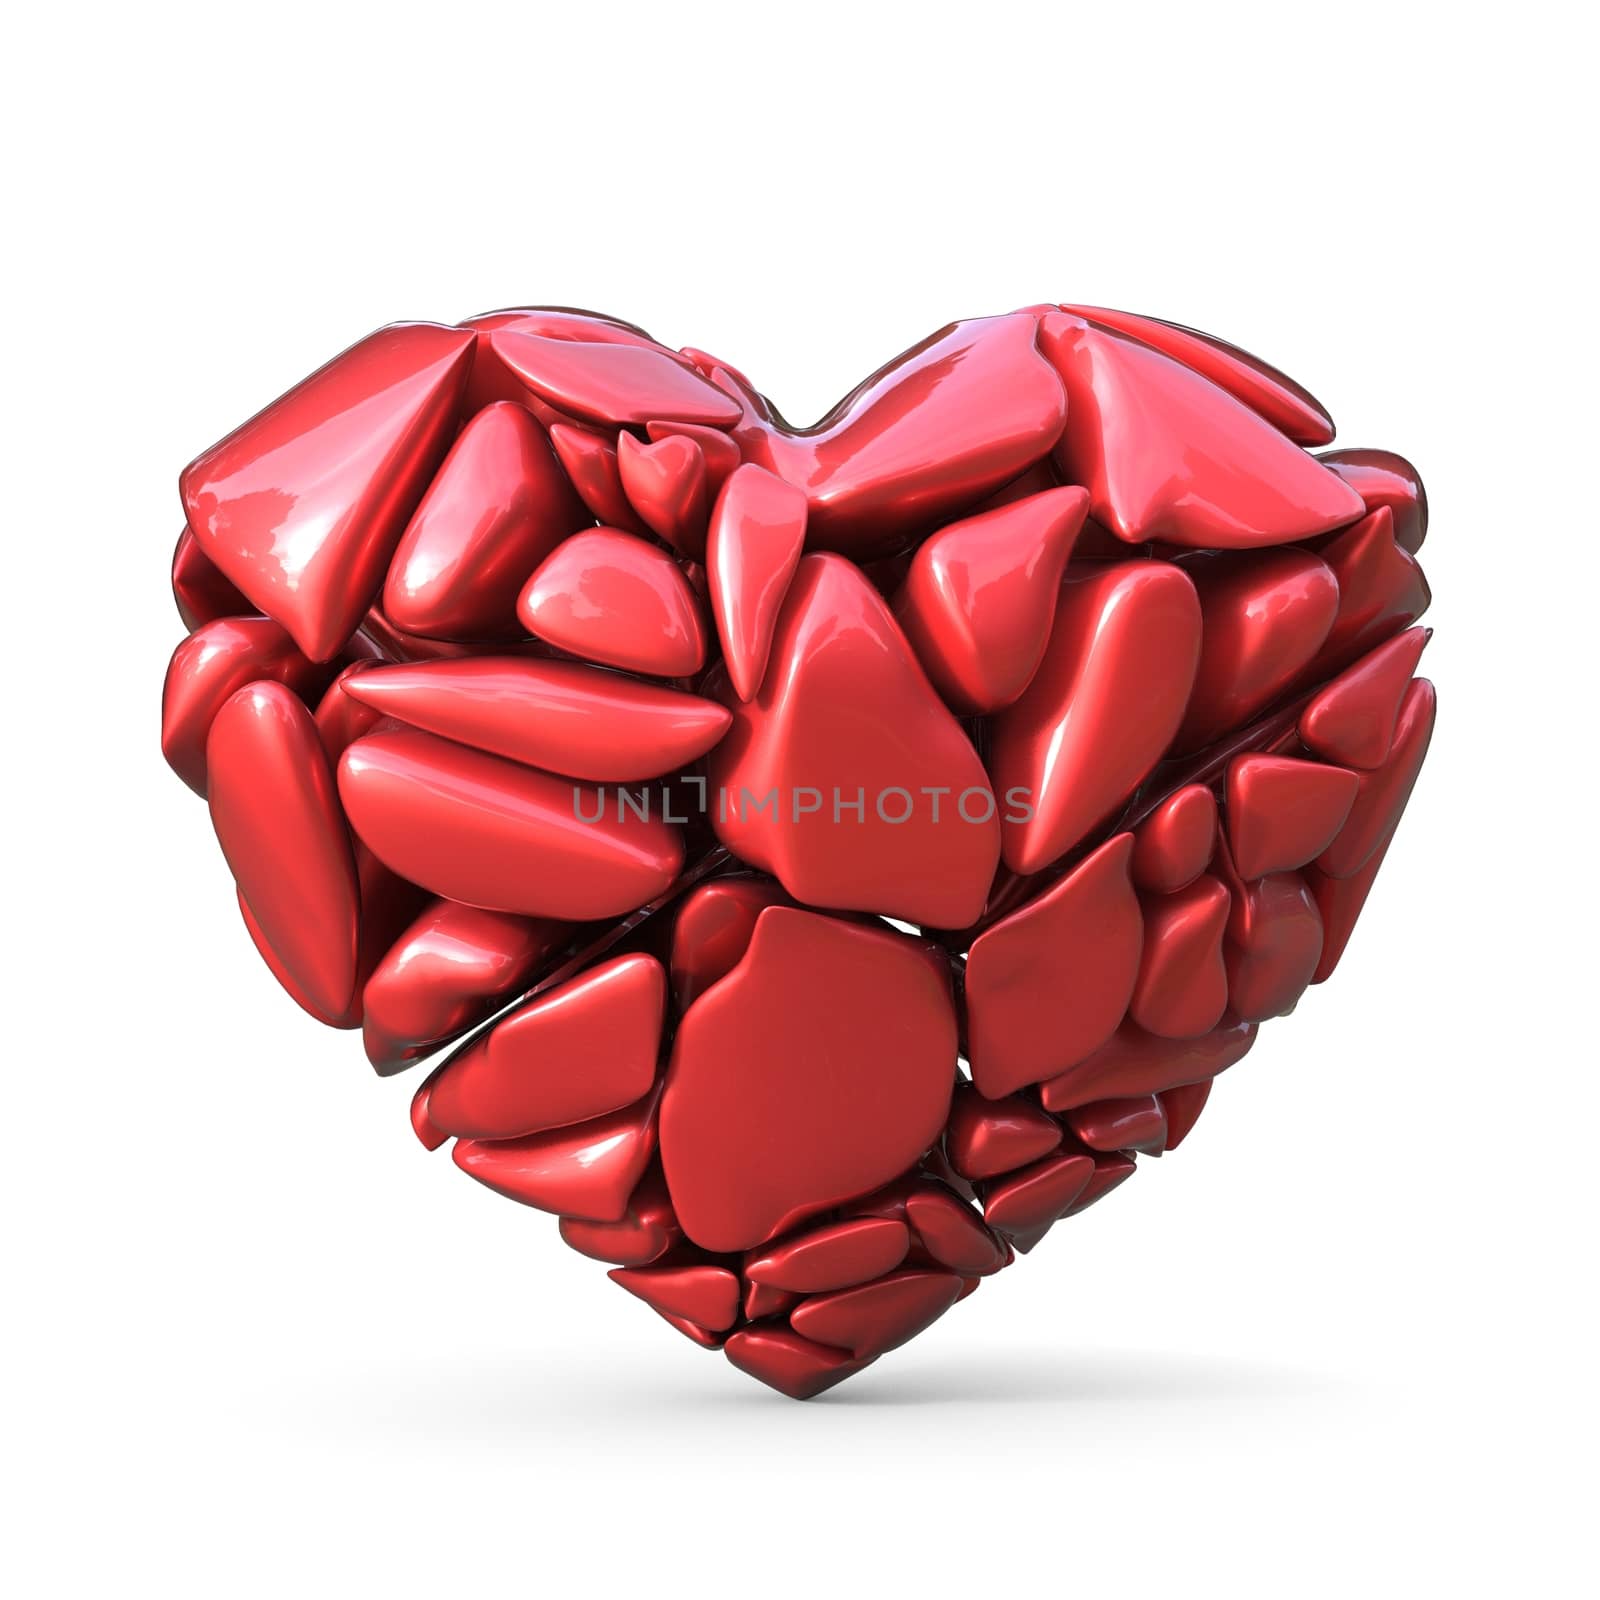 Broken red heart made of red rocks. 3D by djmilic